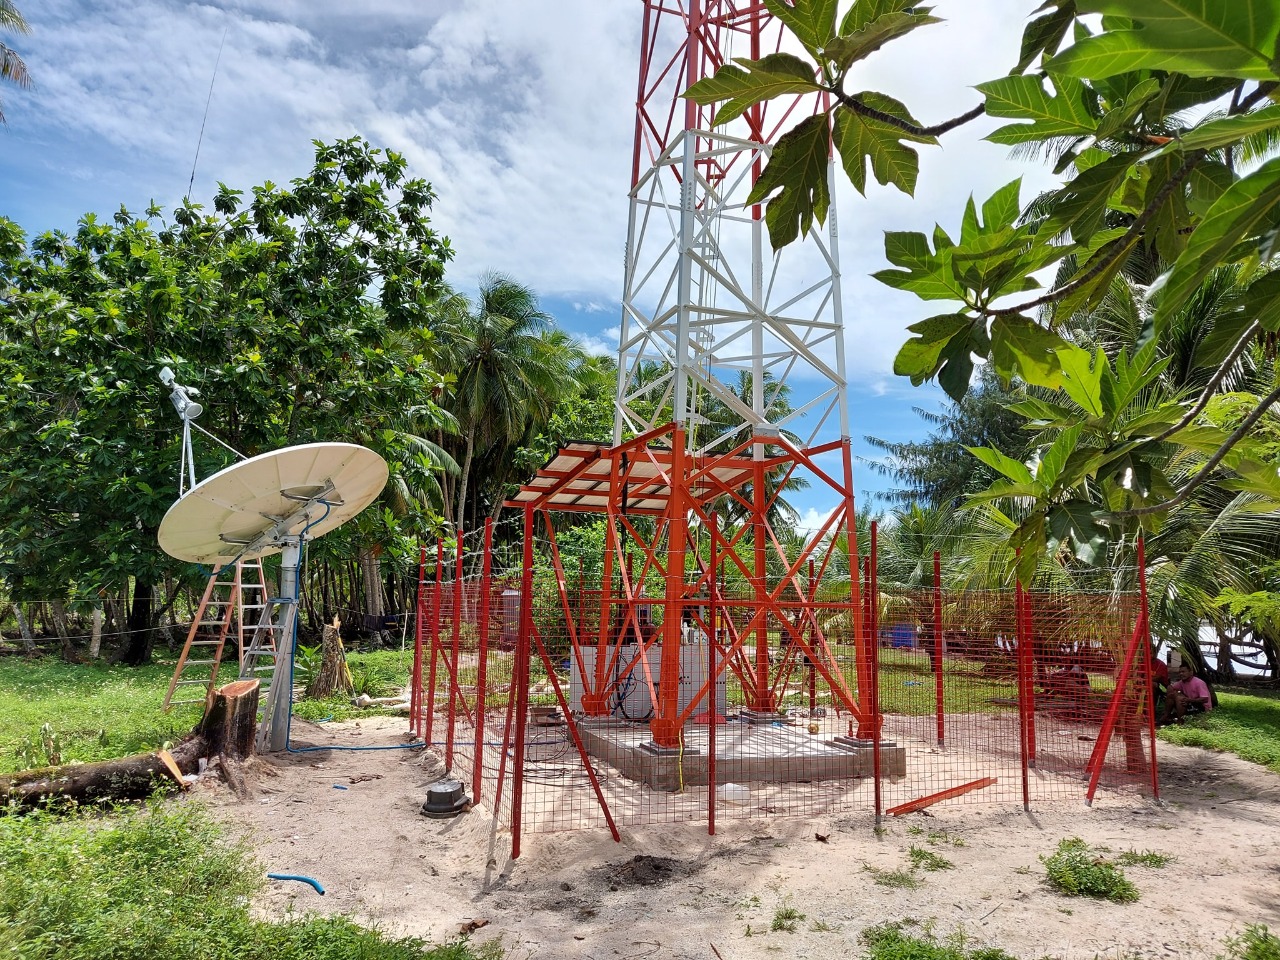 Smart Off-Grid Power Connects Communities in Remote Marshall Islands